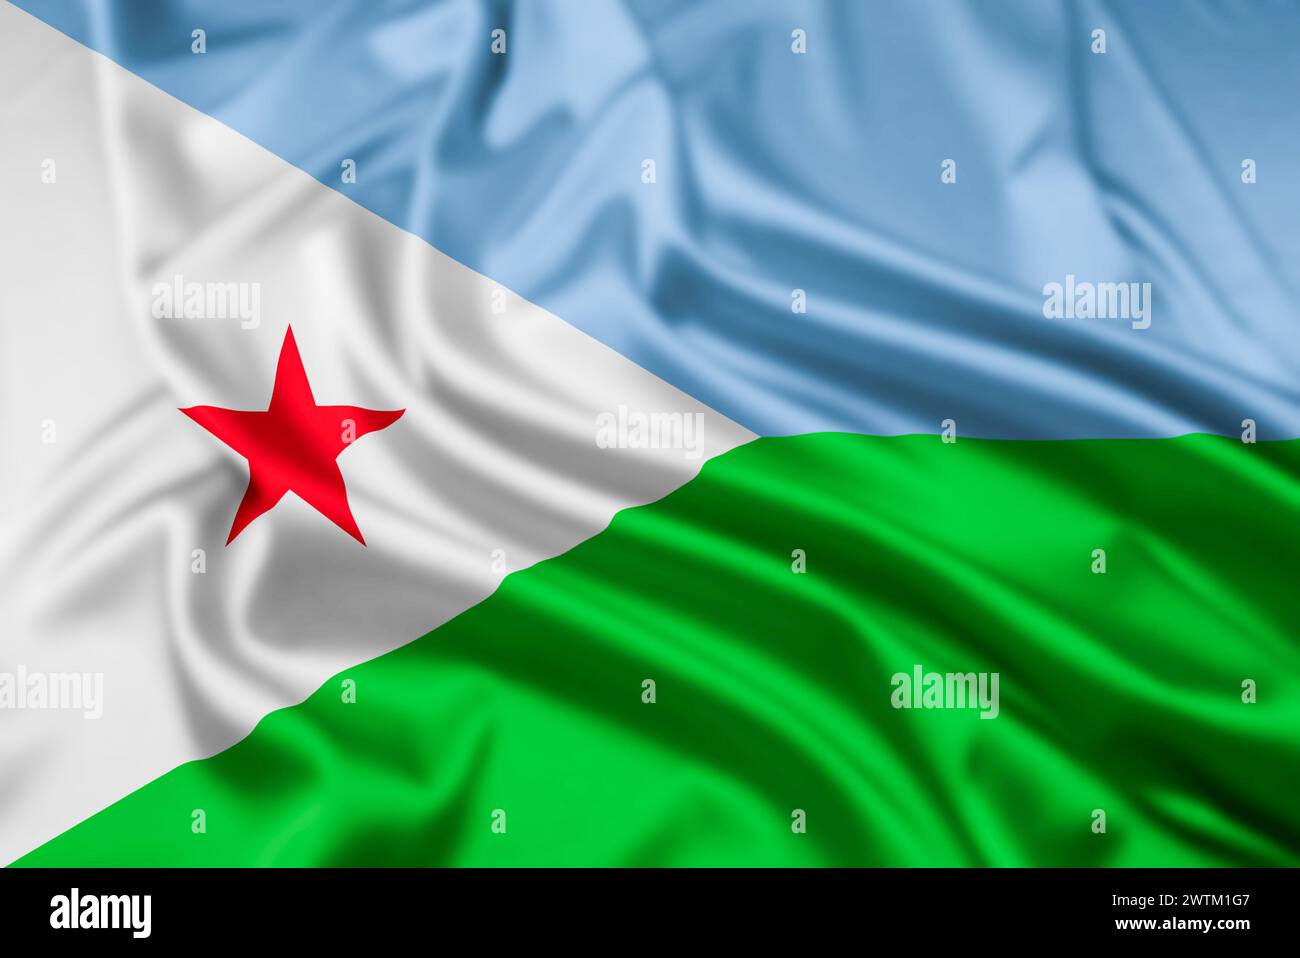 The Flag of The Republic of Djibouti, with a Ripple Effect Stock Photo